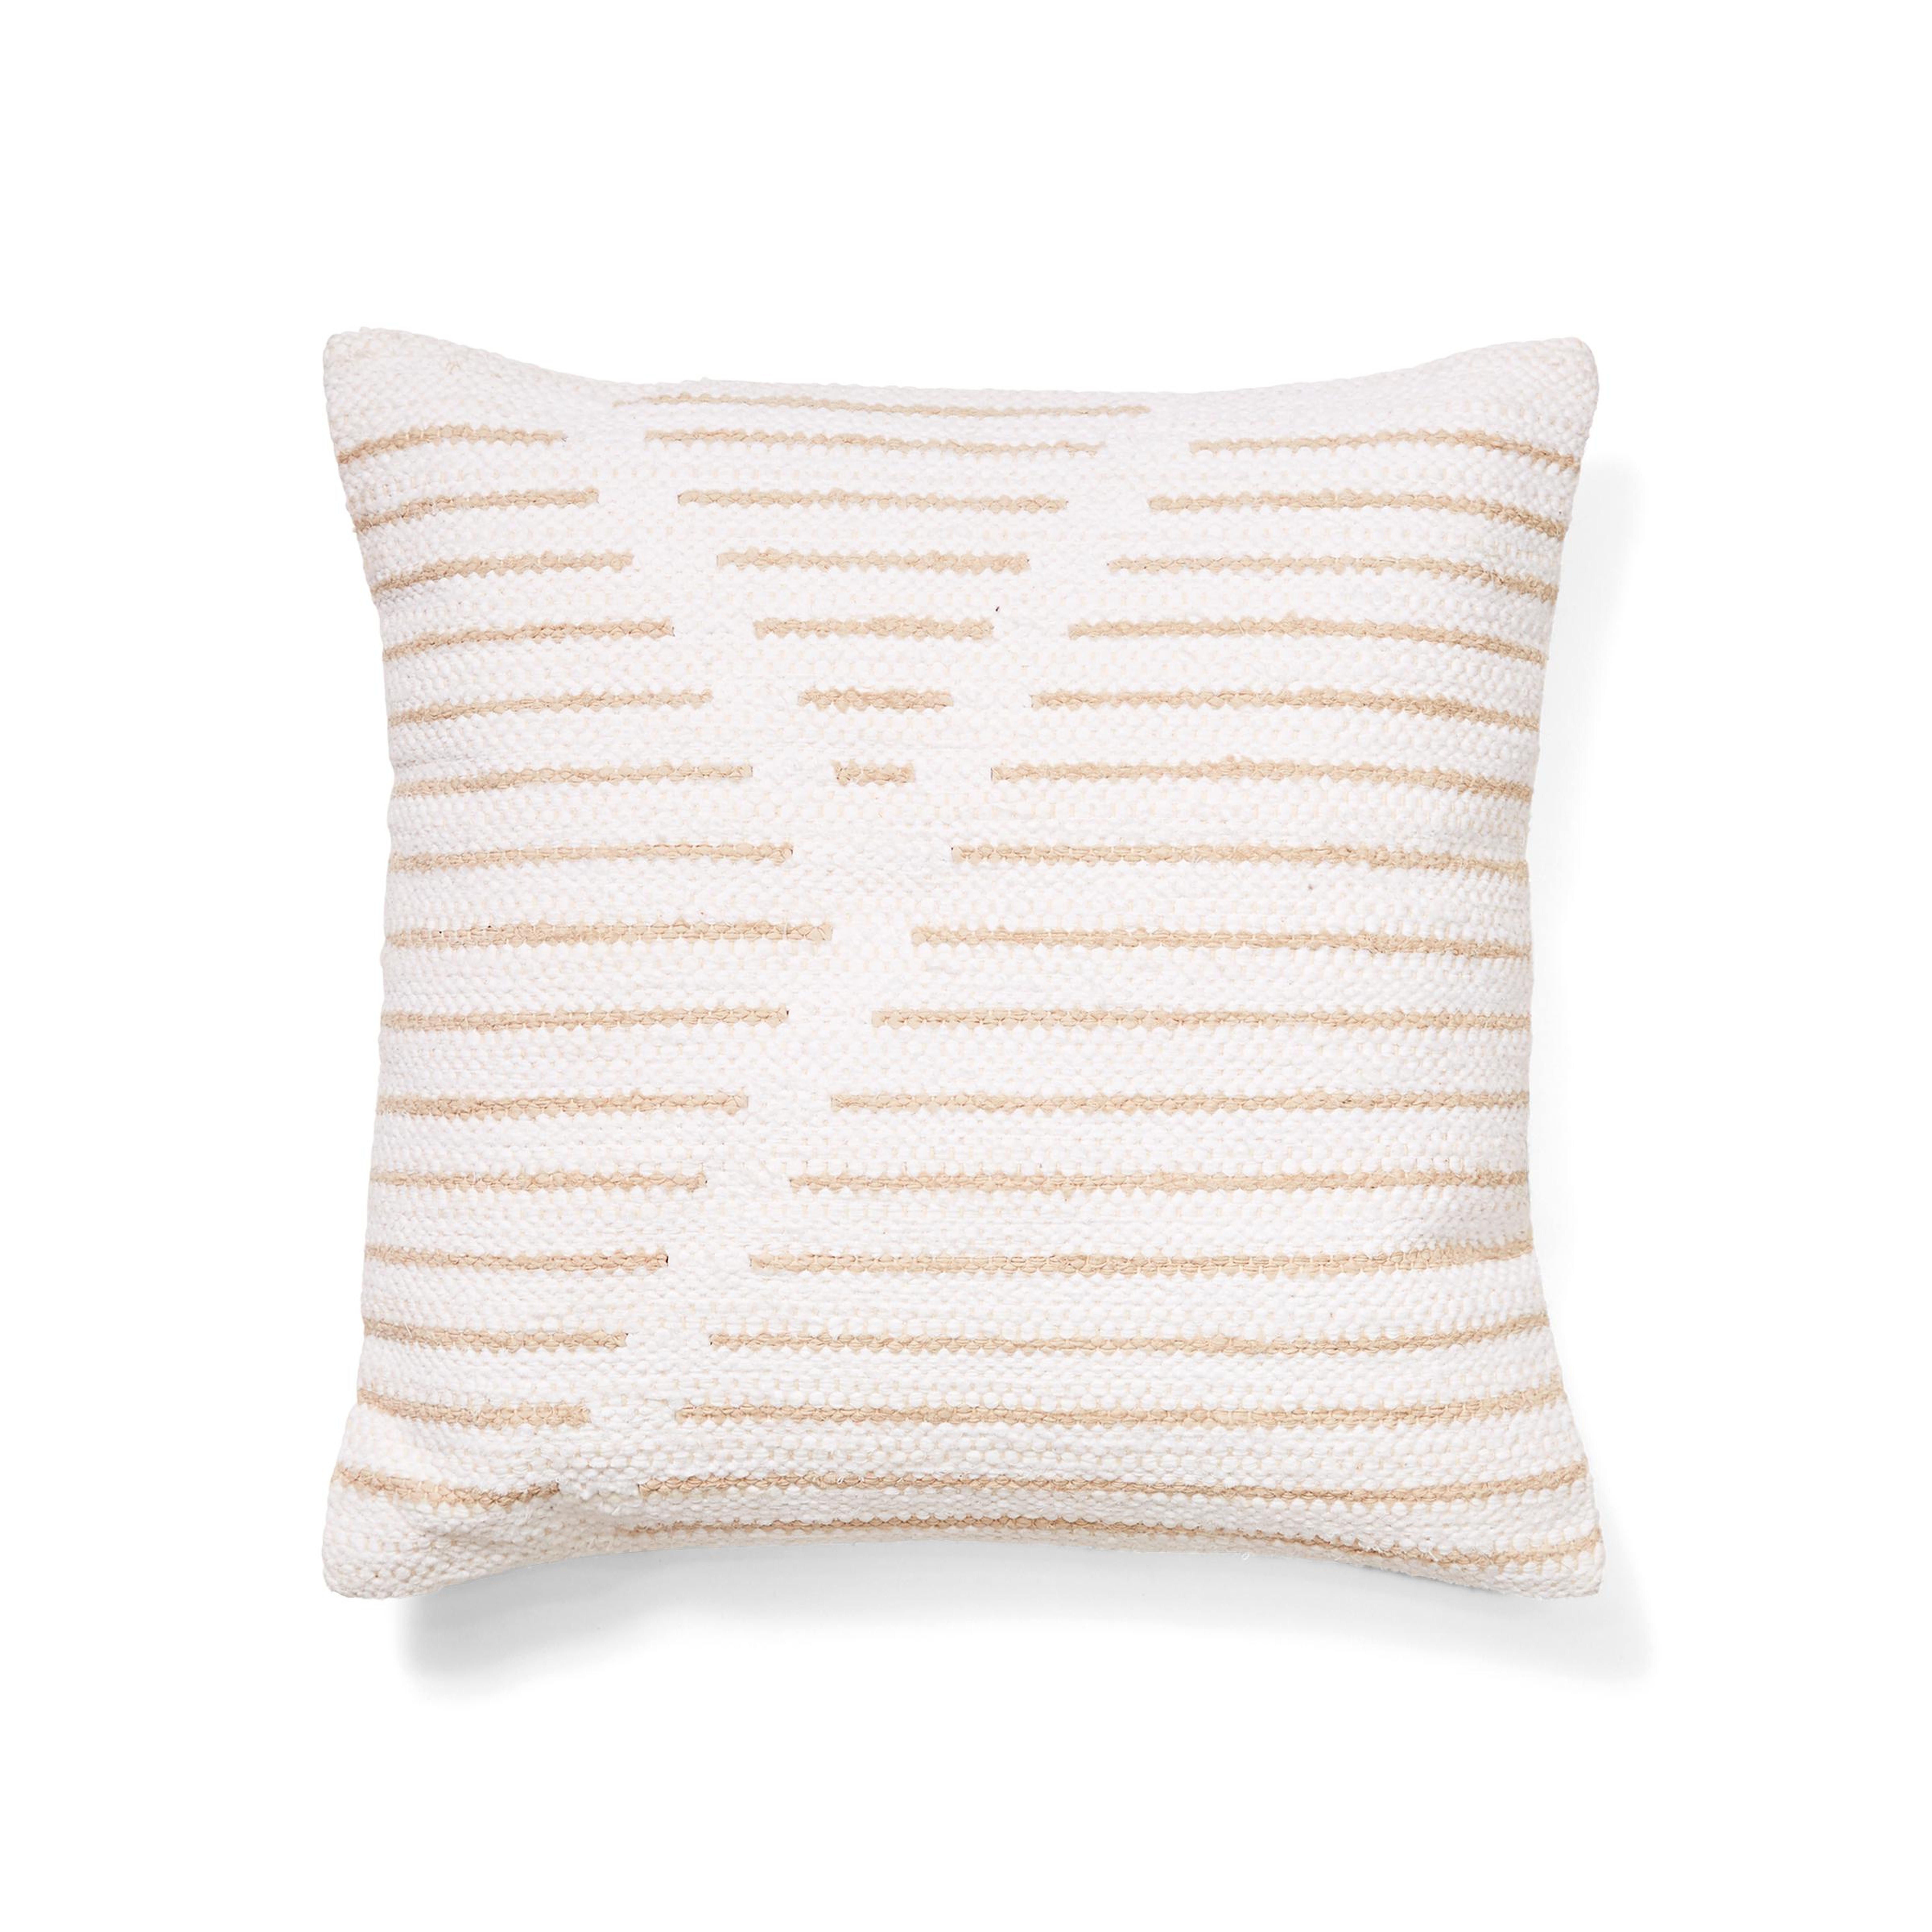 Woven Array Pillow Cover in White - Burrow